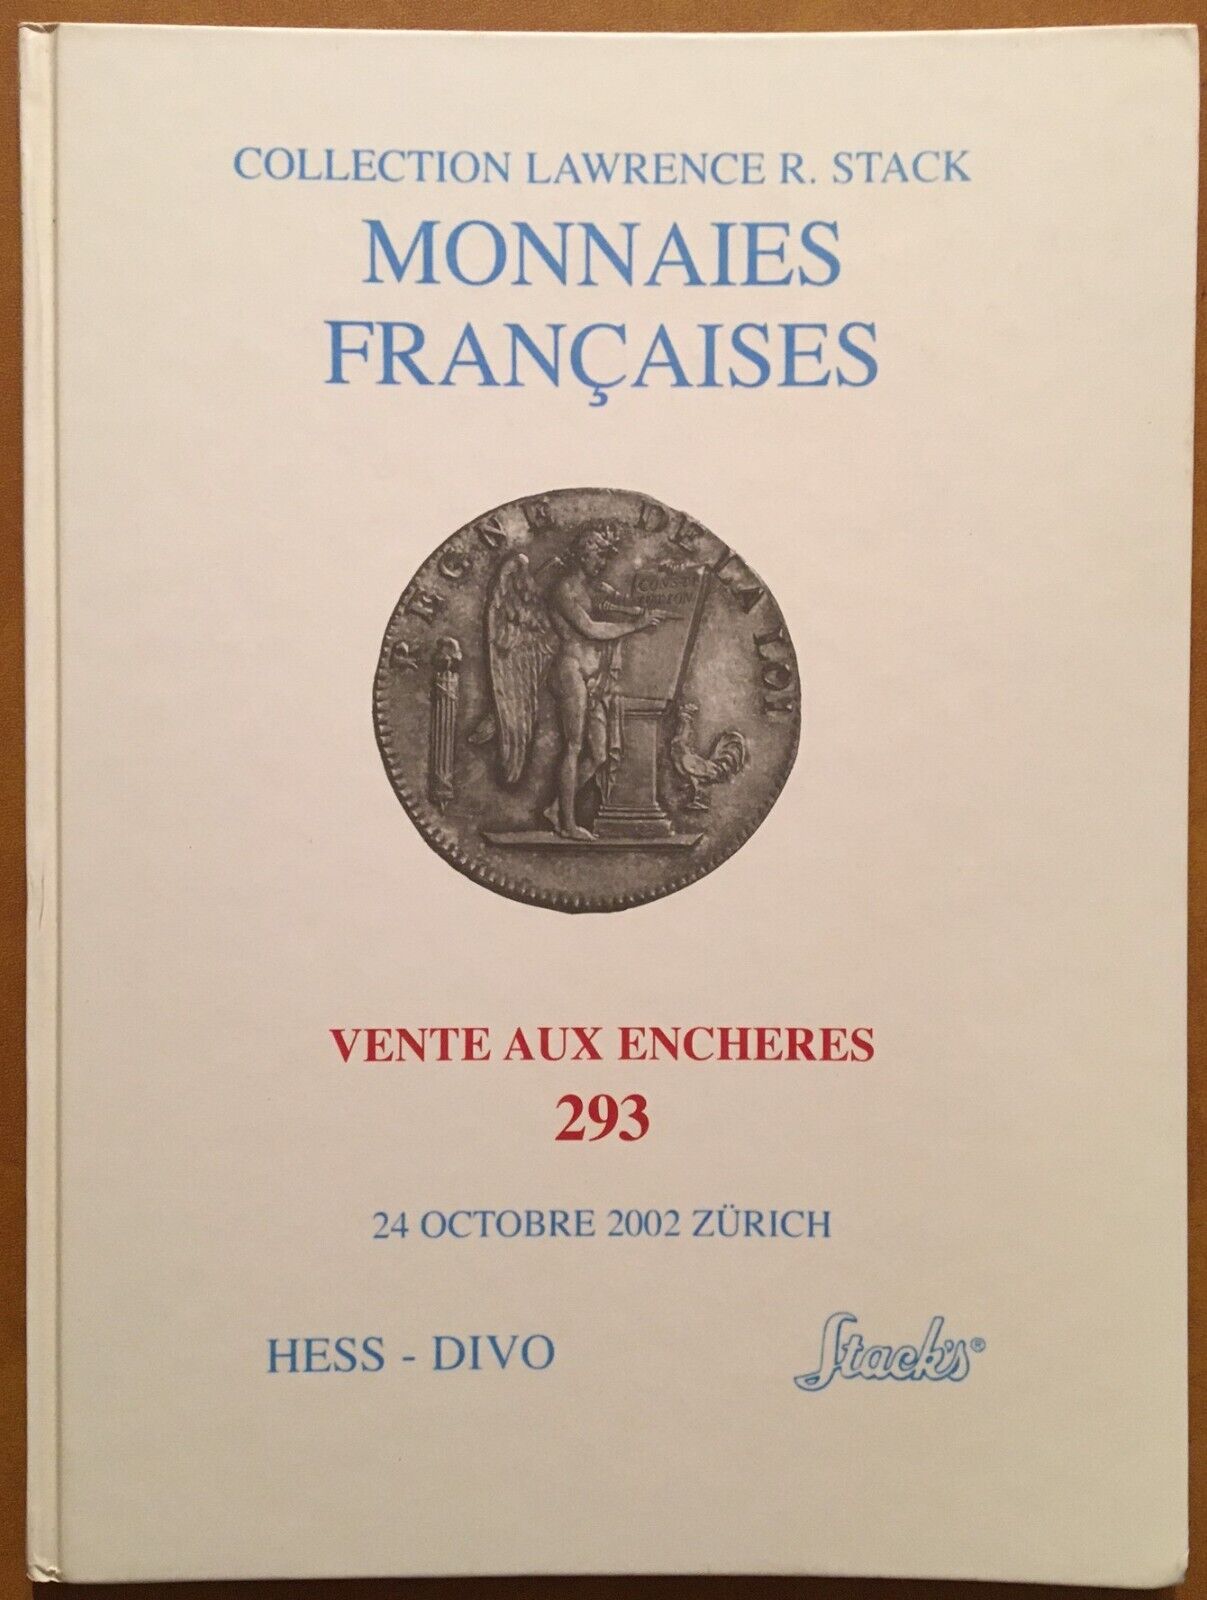 MONNAIES FRANCAISES OCT. 2002 LAWRENCE R. STACK NUMISMATIC CATALOGUE 25475145 🌈 Hess-Divo & Stack's